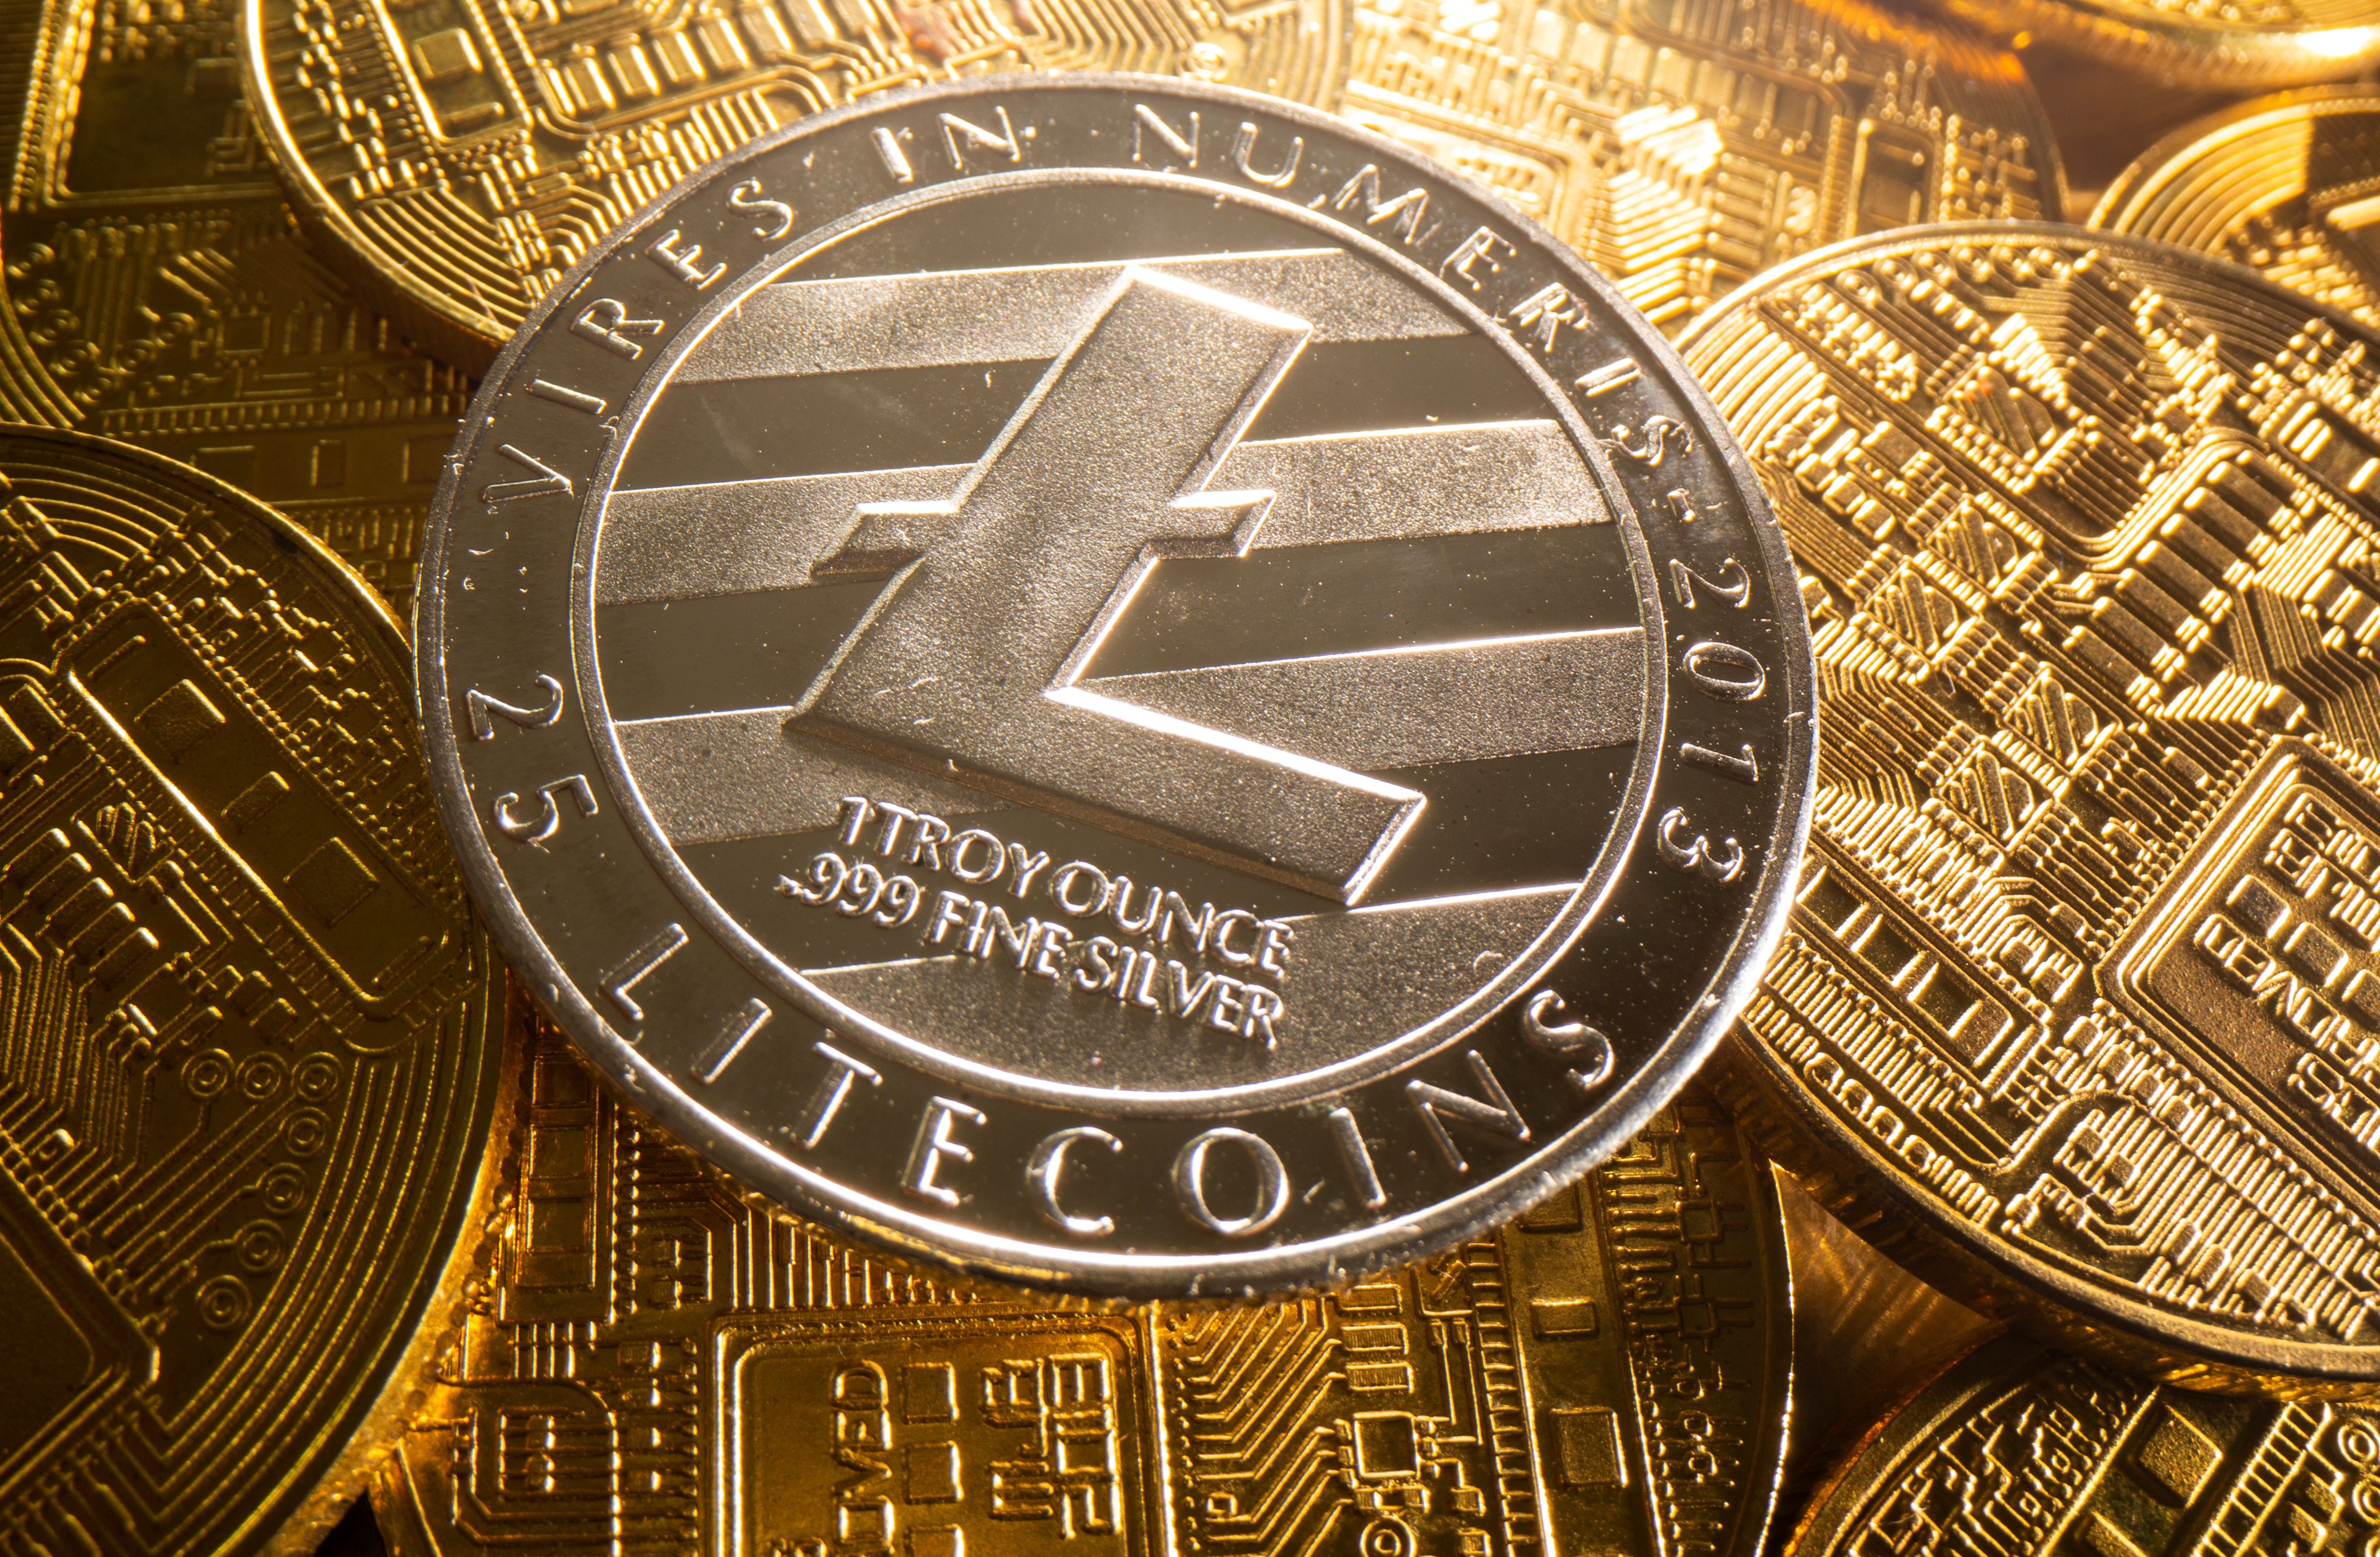 Litecoin - what is it?